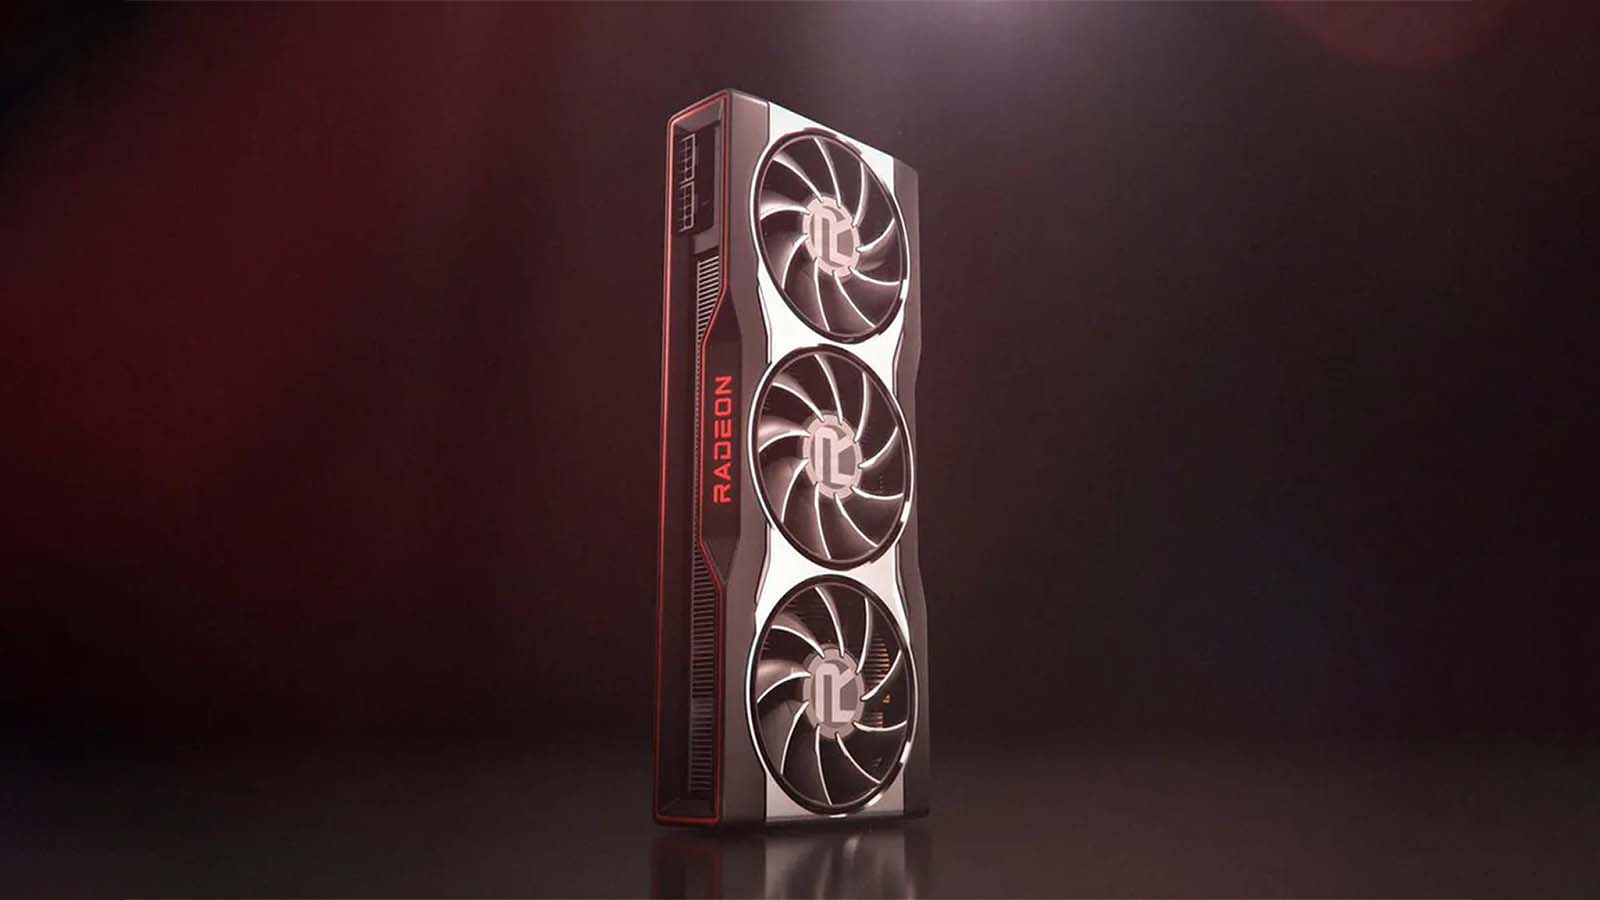 An AMD Radeon Graphics Card With Three Fans Standing Upright Against A Dark Red Backdrop